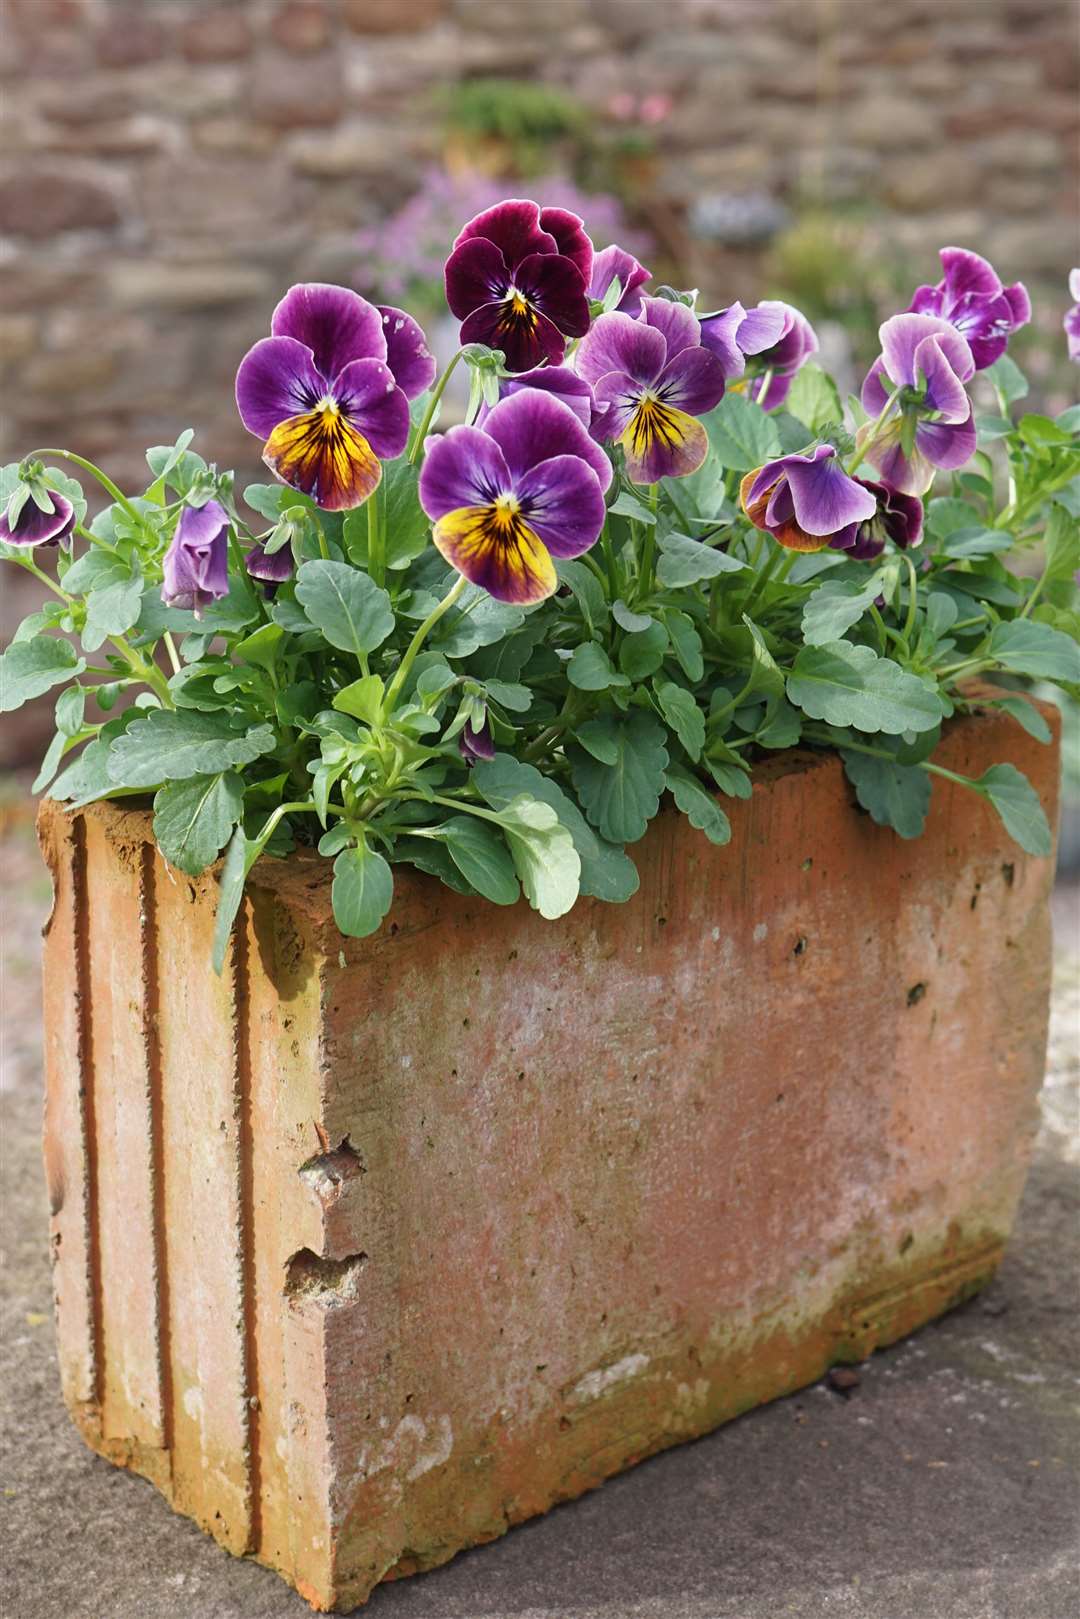 Viola 'Sorbet Antique Shade' in an old brick. Picture: Tom Harris/PA